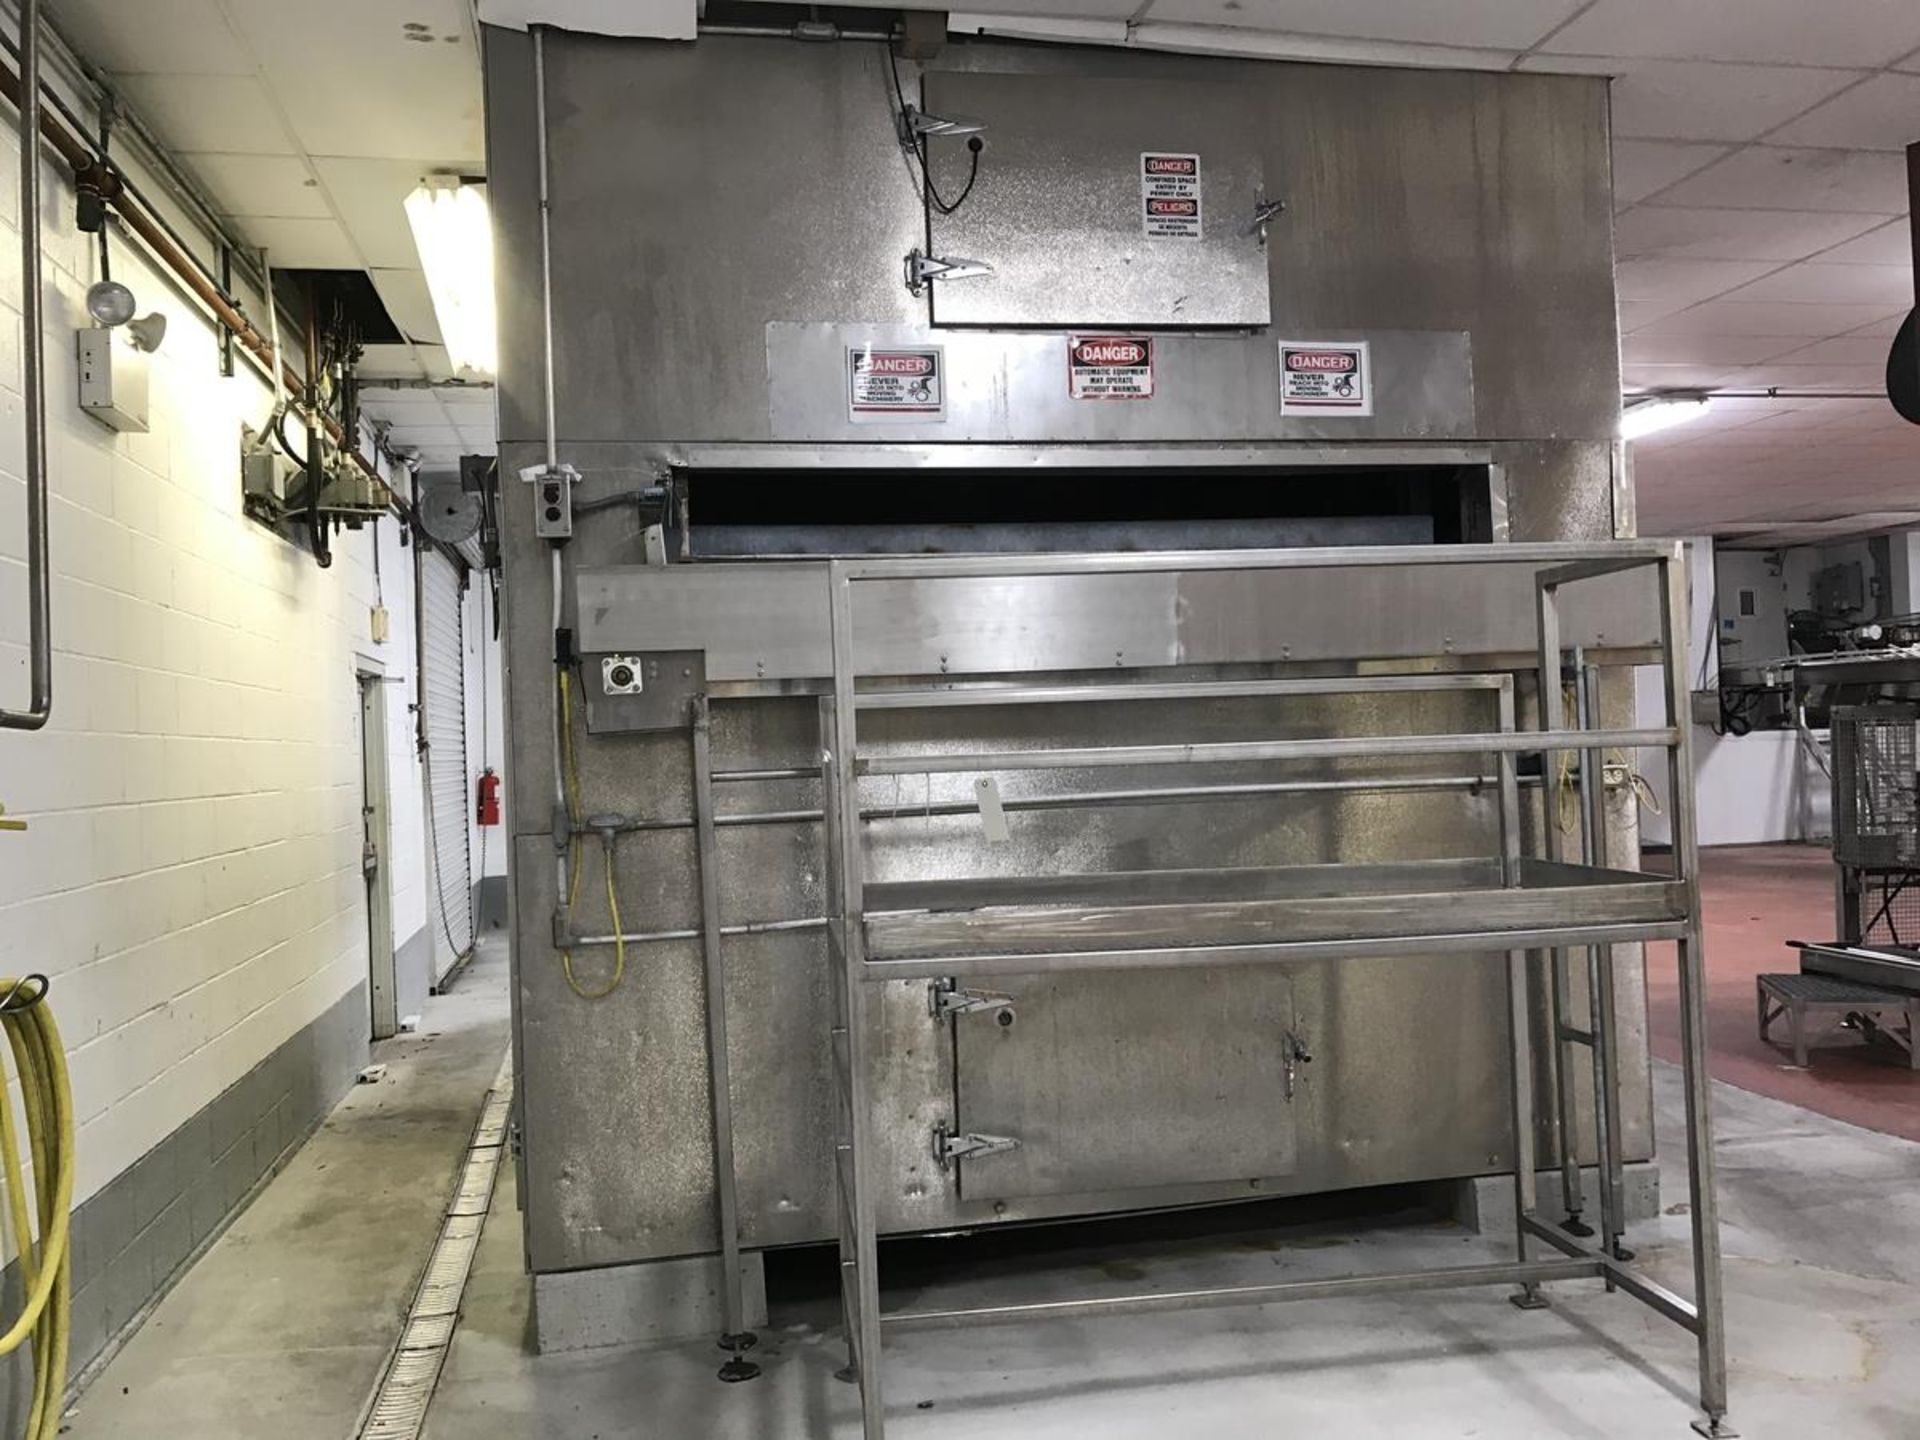 Amerio Plate Freezer, 94in x 146in Plates, 16 Plates | Rig Fee: Contact Rigger - Image 3 of 4